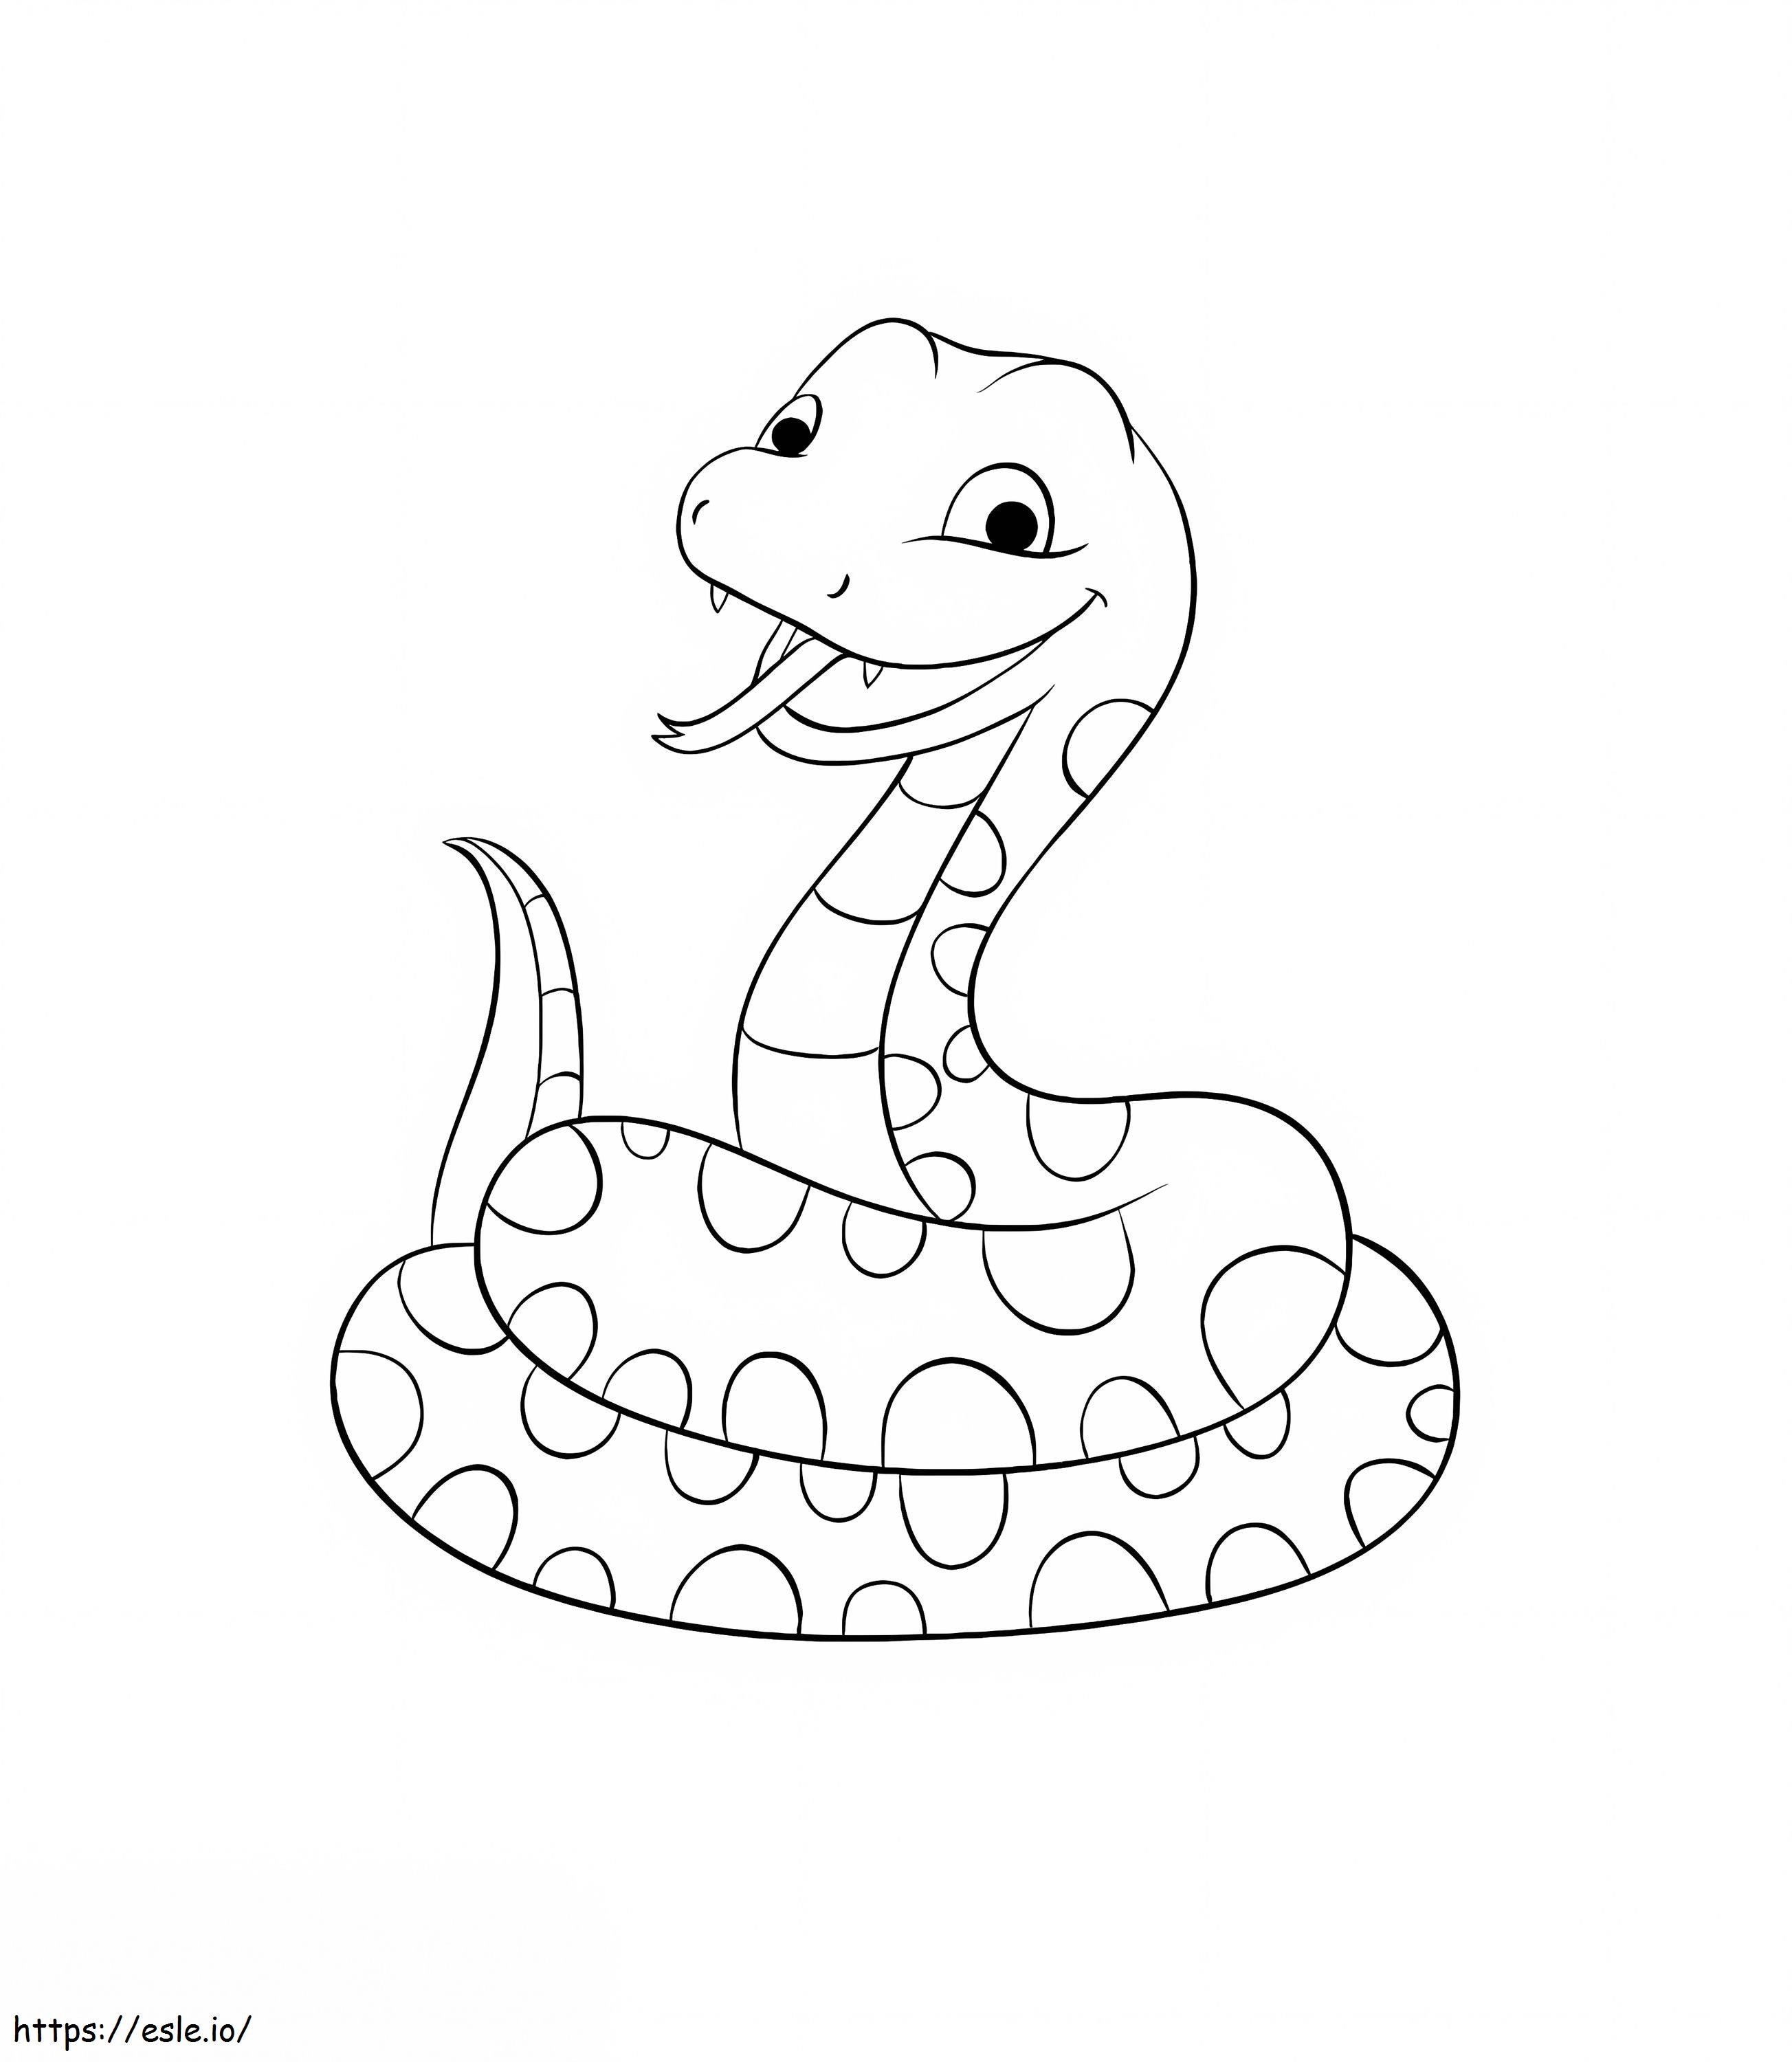 Laughing Snake coloring page